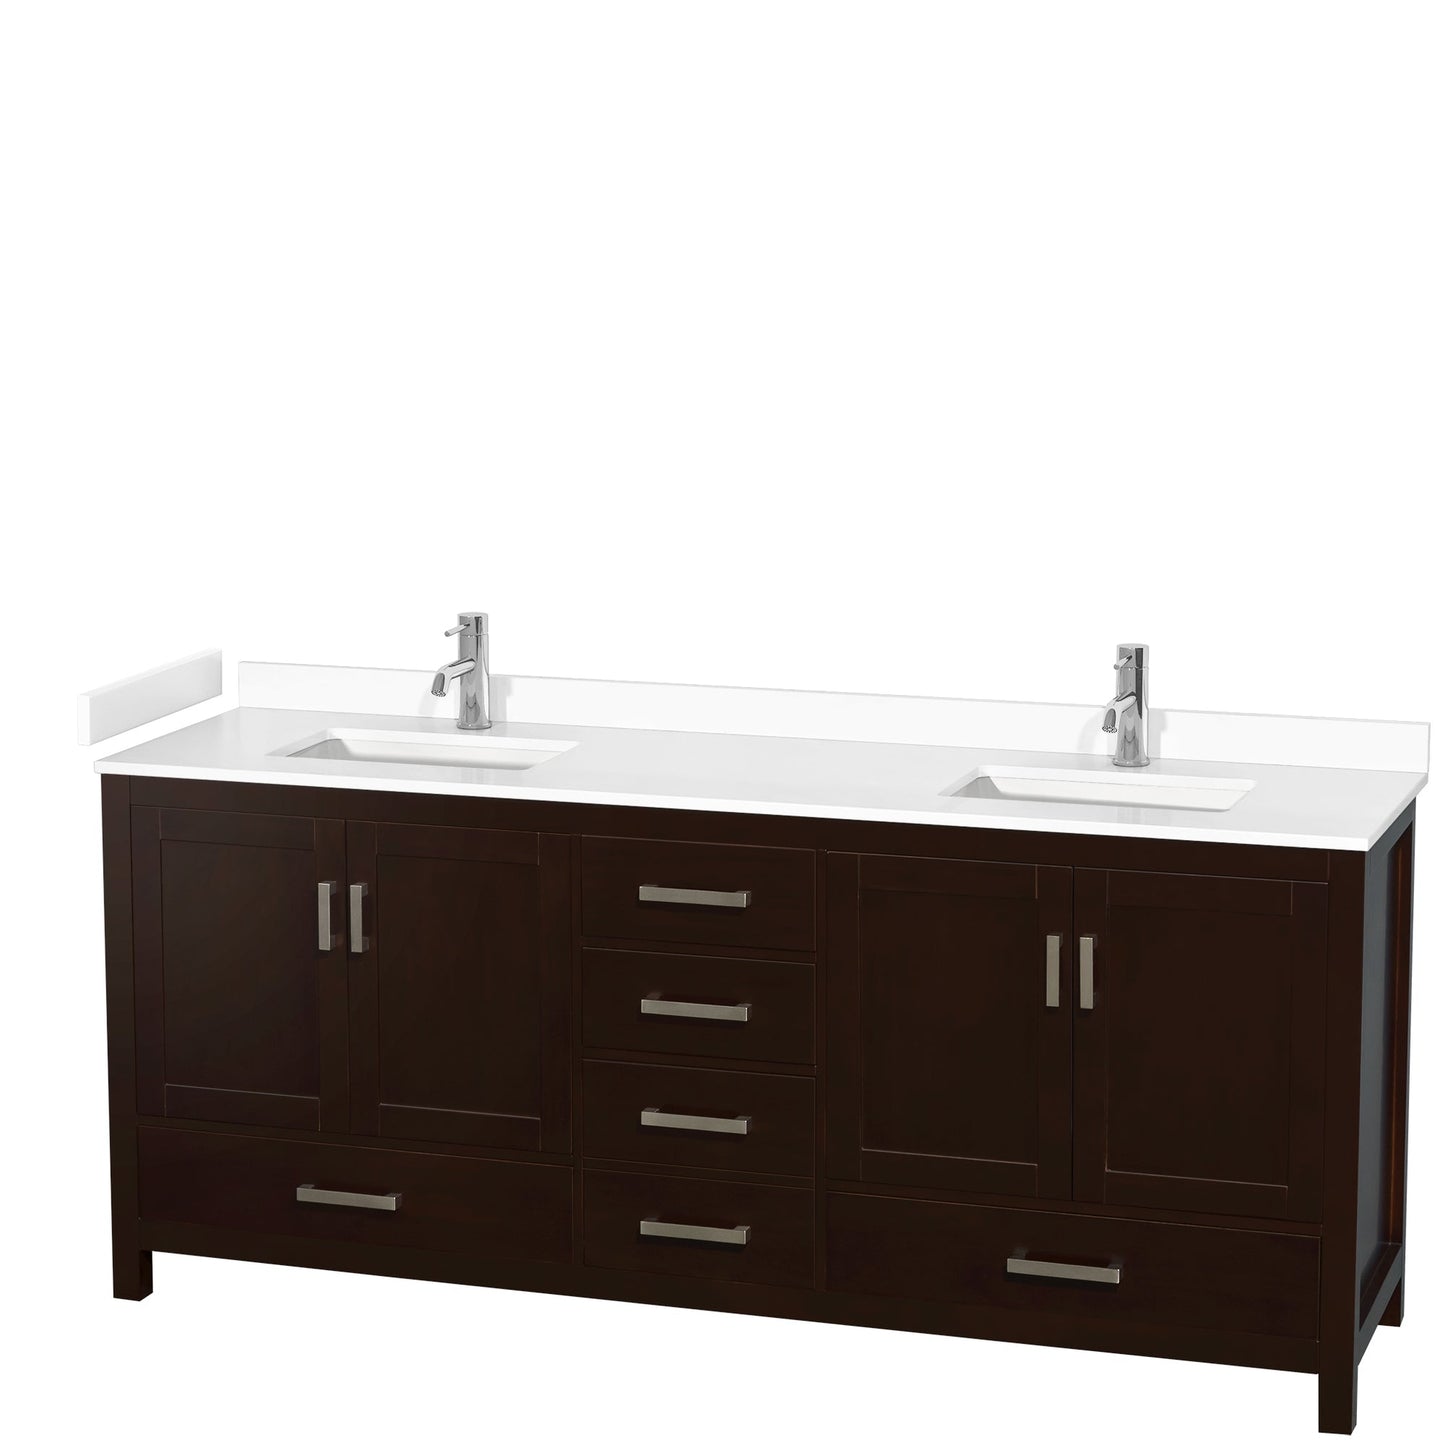 Wyndham Collection Sheffield 80" Double Bathroom Vanity in Espresso, White Cultured Marble Countertop, Undermount Square Sinks, No Mirror